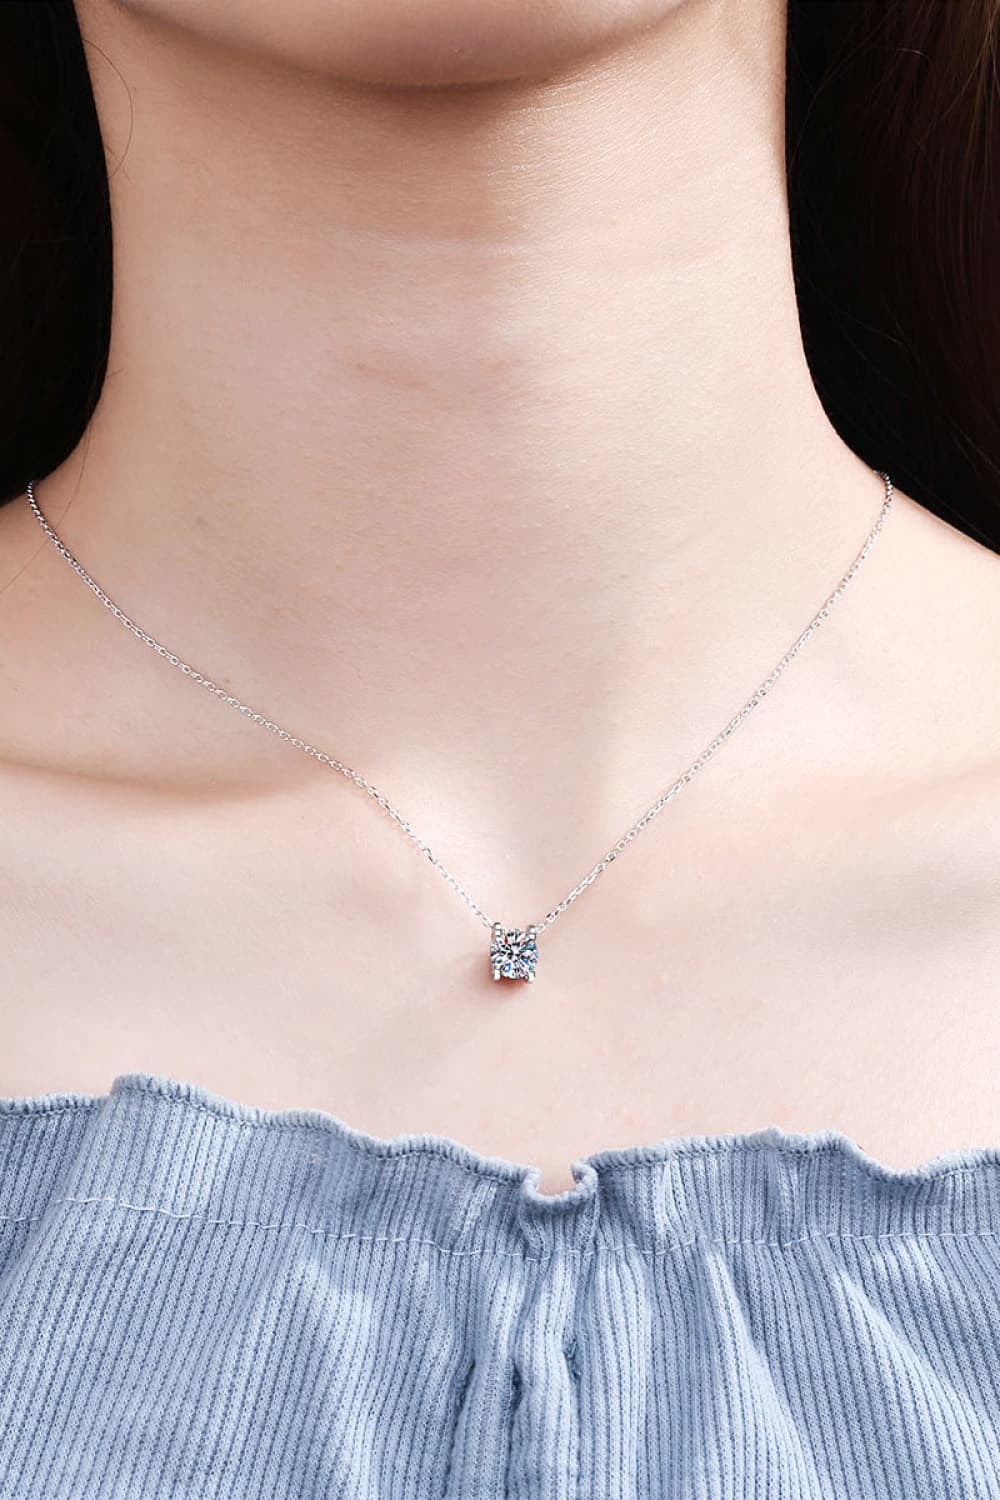 .8 Carat Moissanite 925 Sterling Silver Necklace